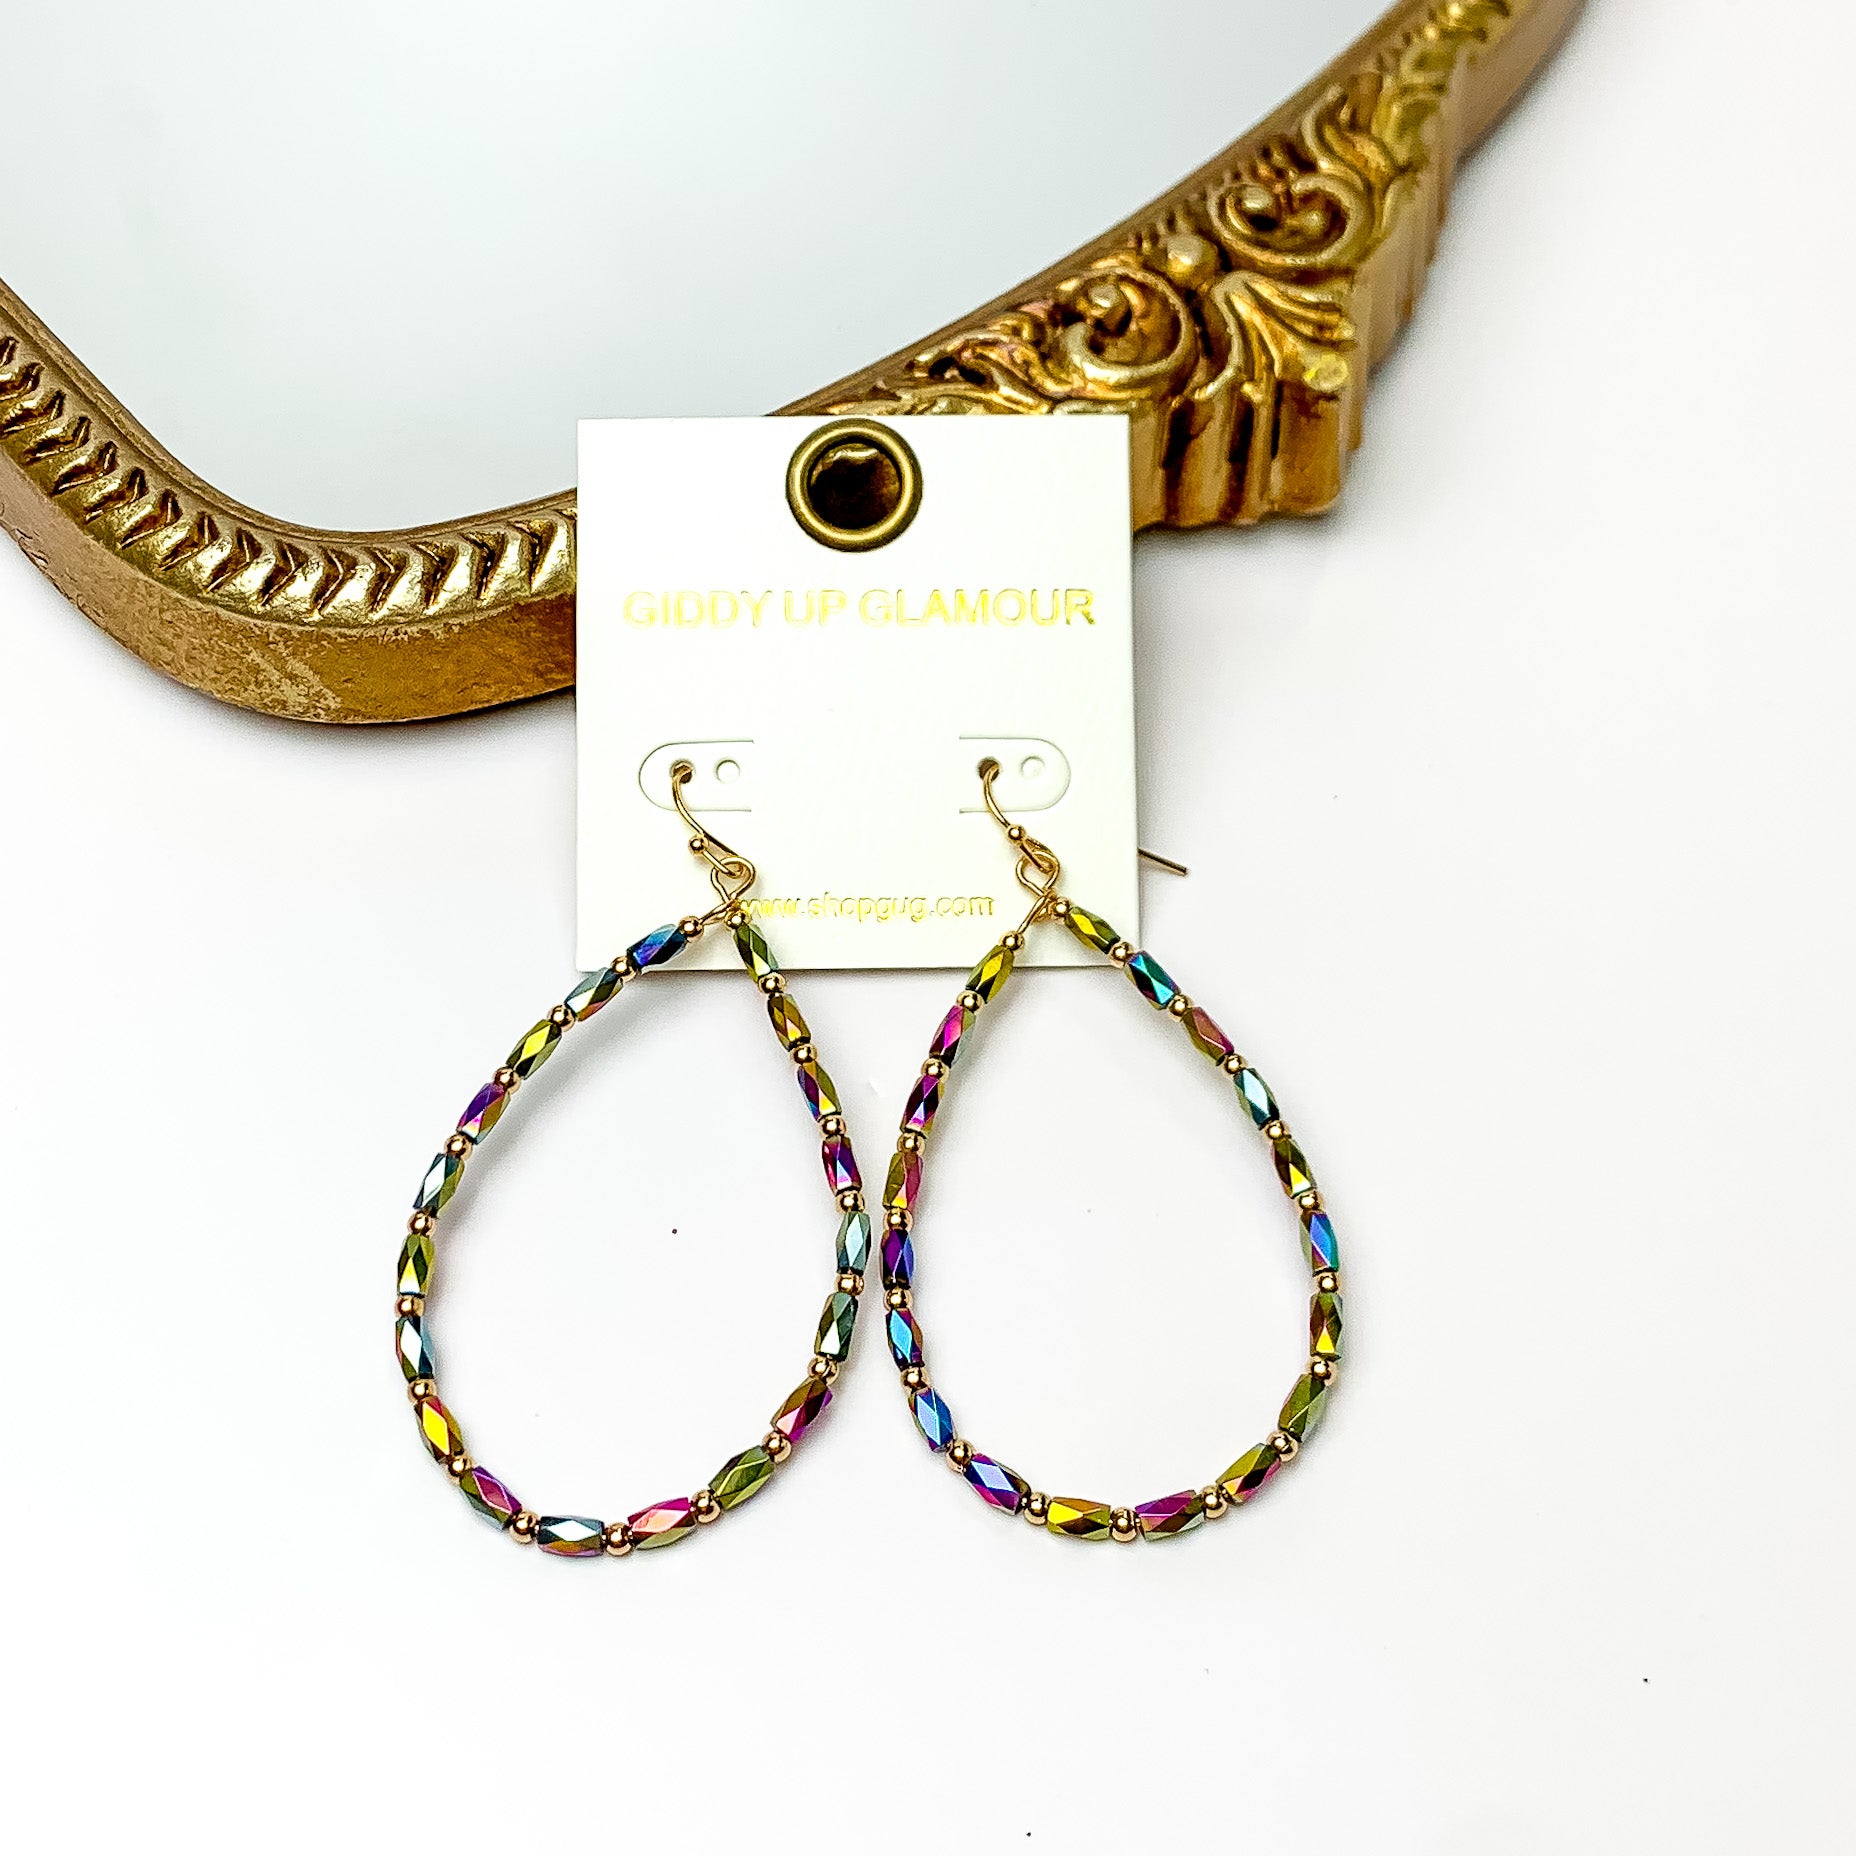 Multicolored open drop earrings with gold tone accents. Pictured on a white background with a gold frame through it.